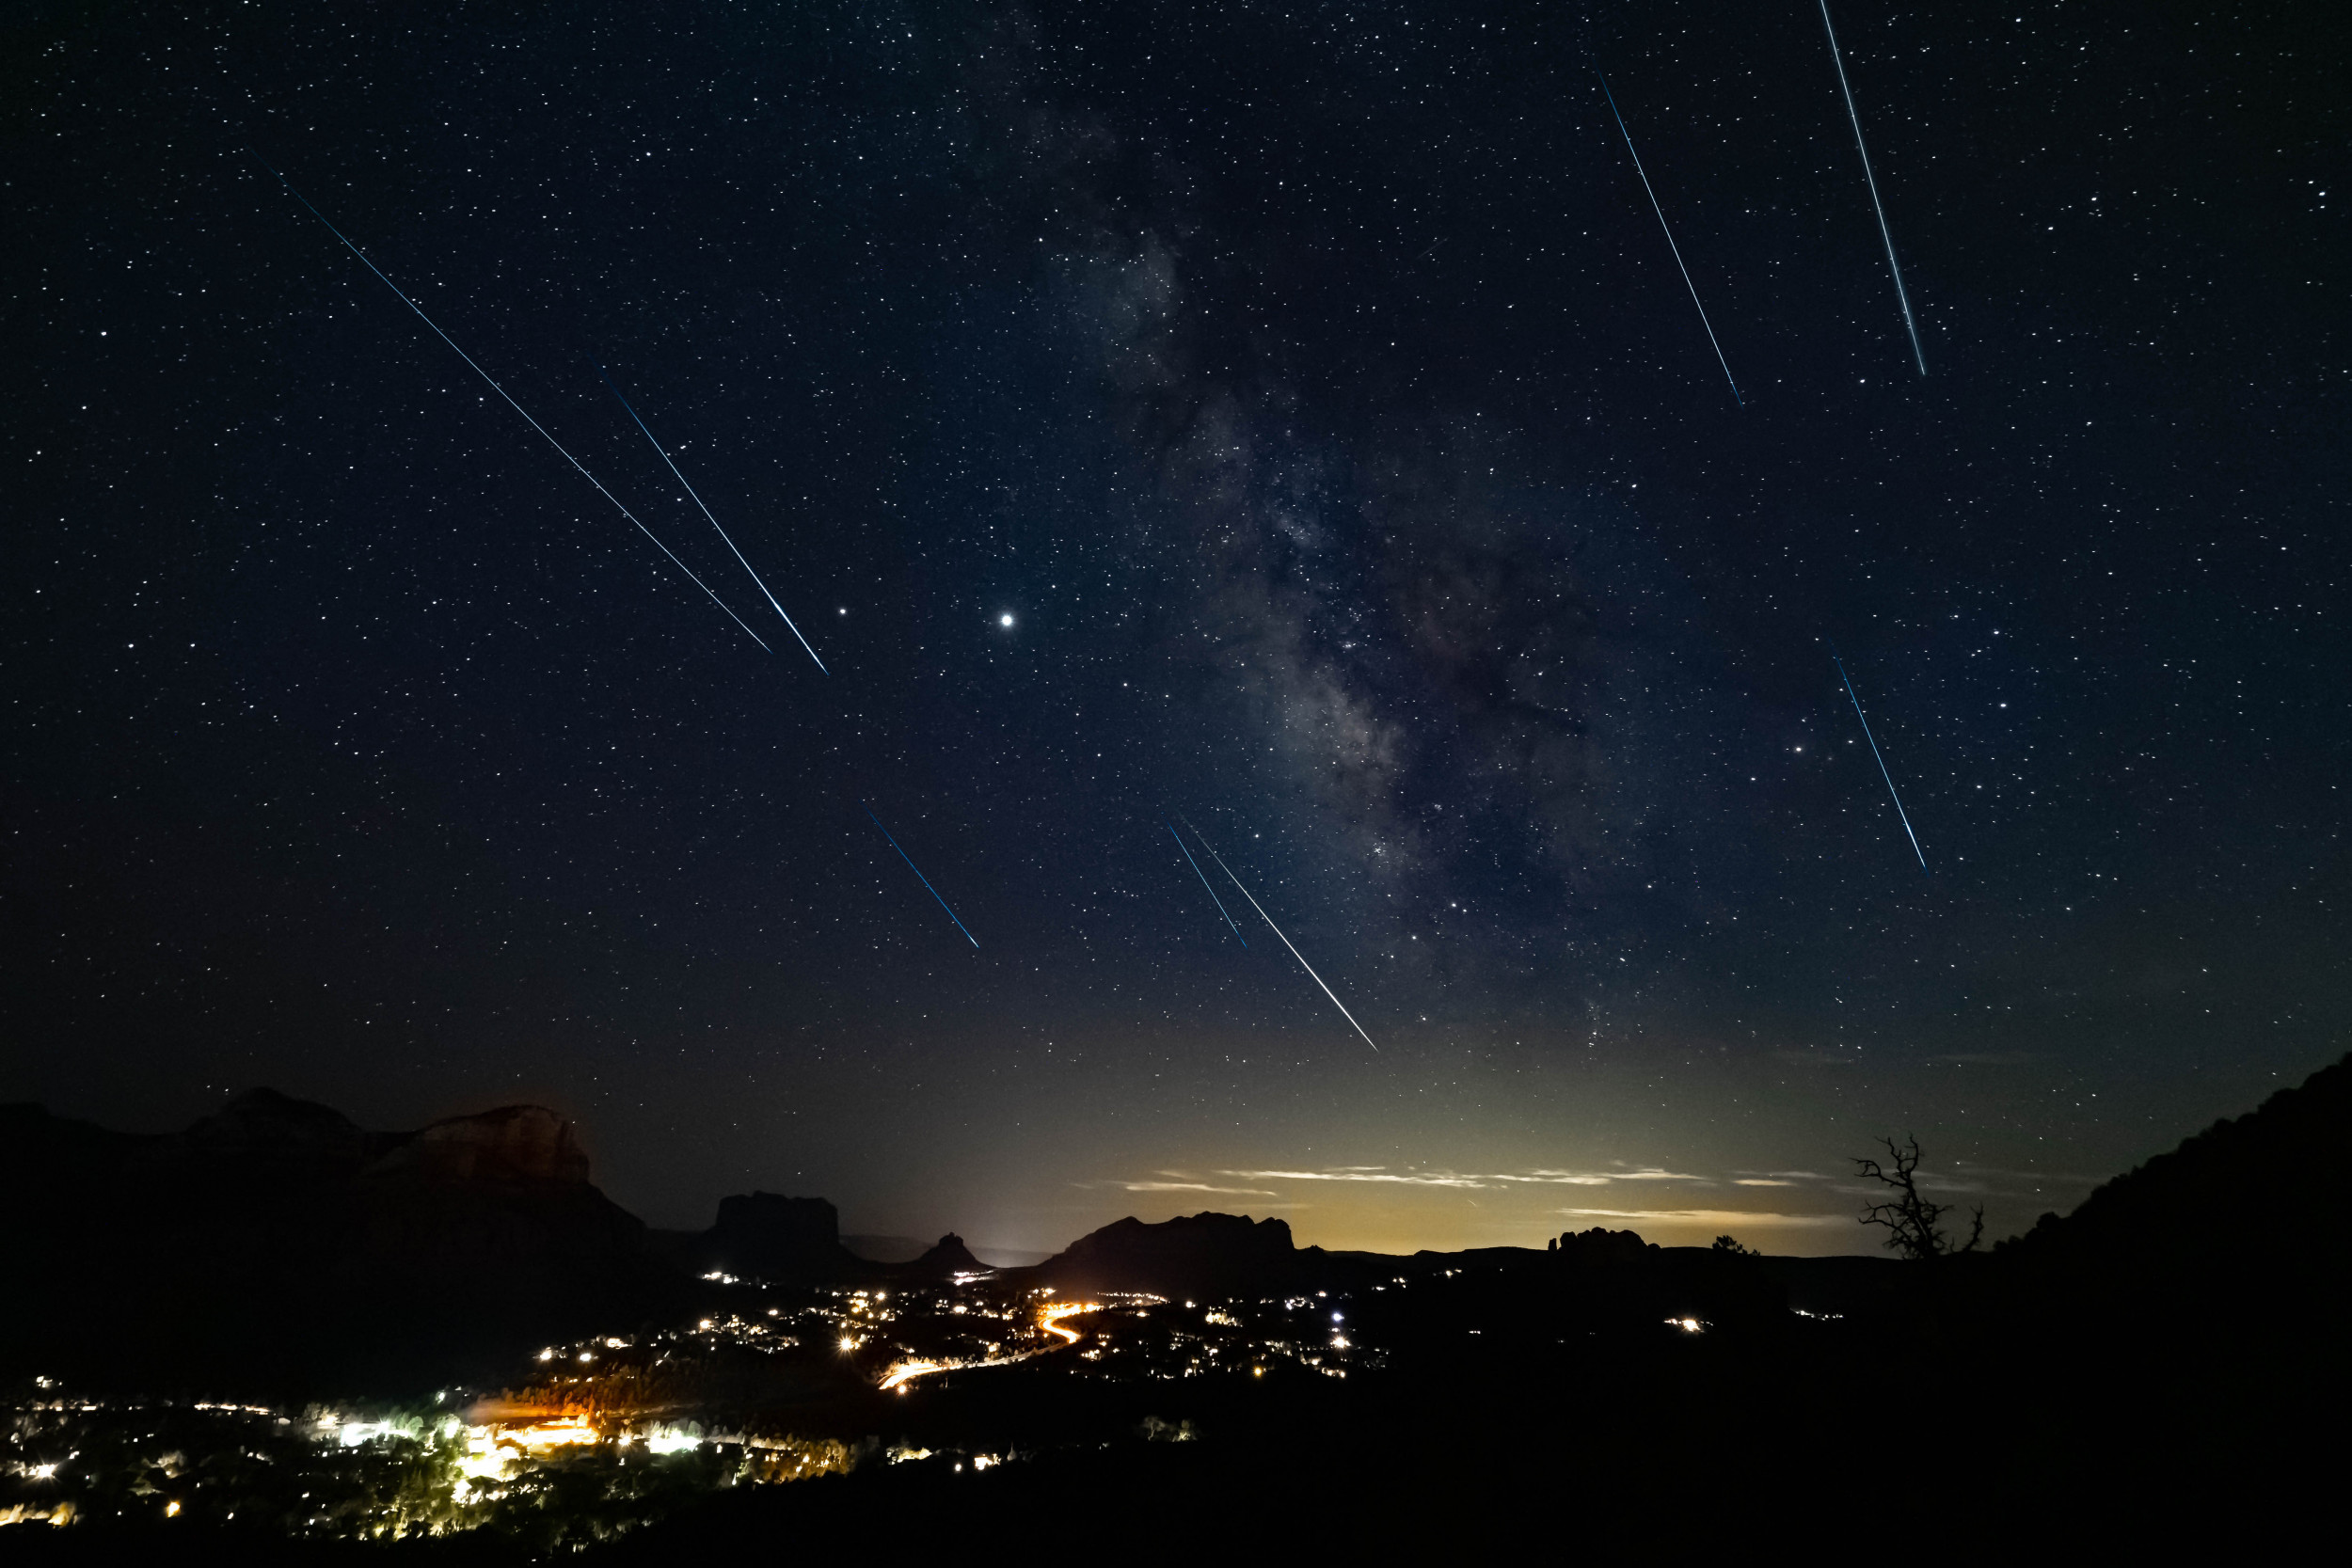 When Is the Perseid Meteor Shower 2021 and Where Can I Watch?